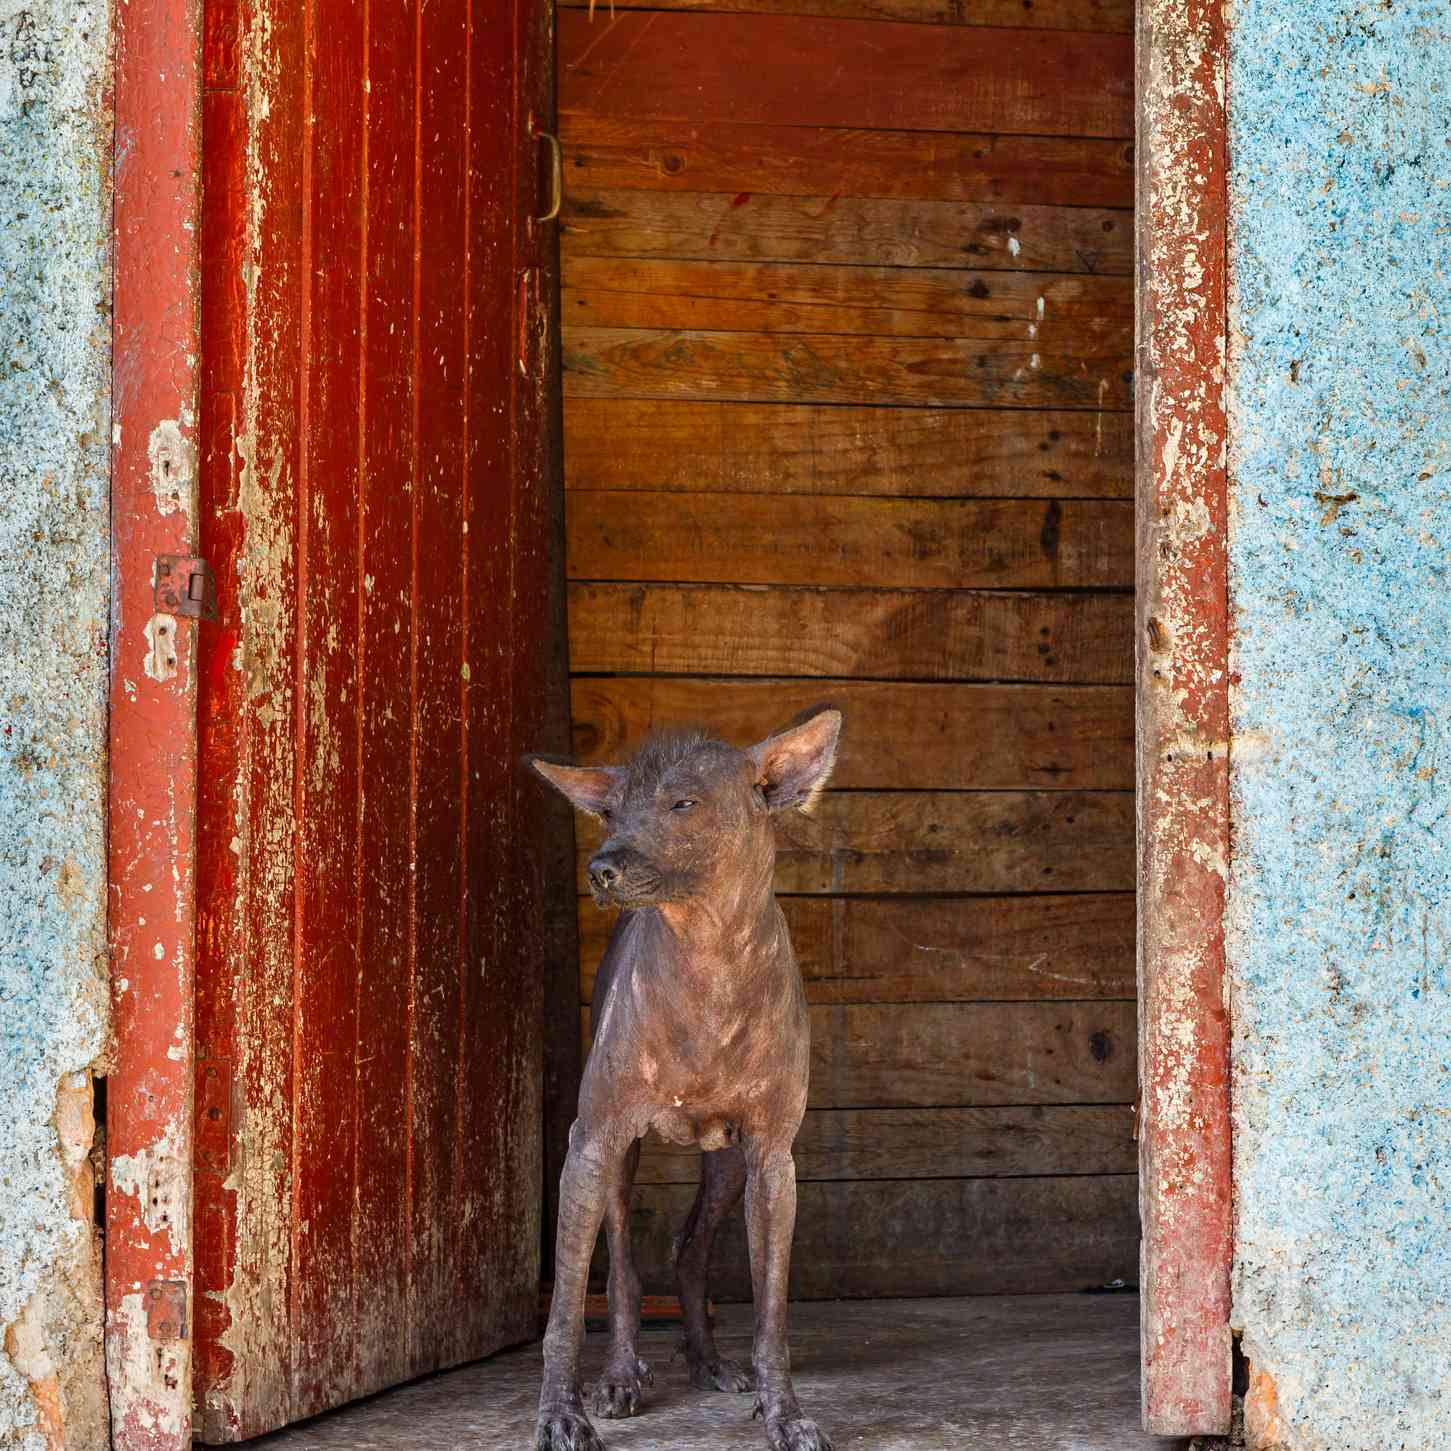 A small hairless dog standing on a cement step in the front of an open wood door.